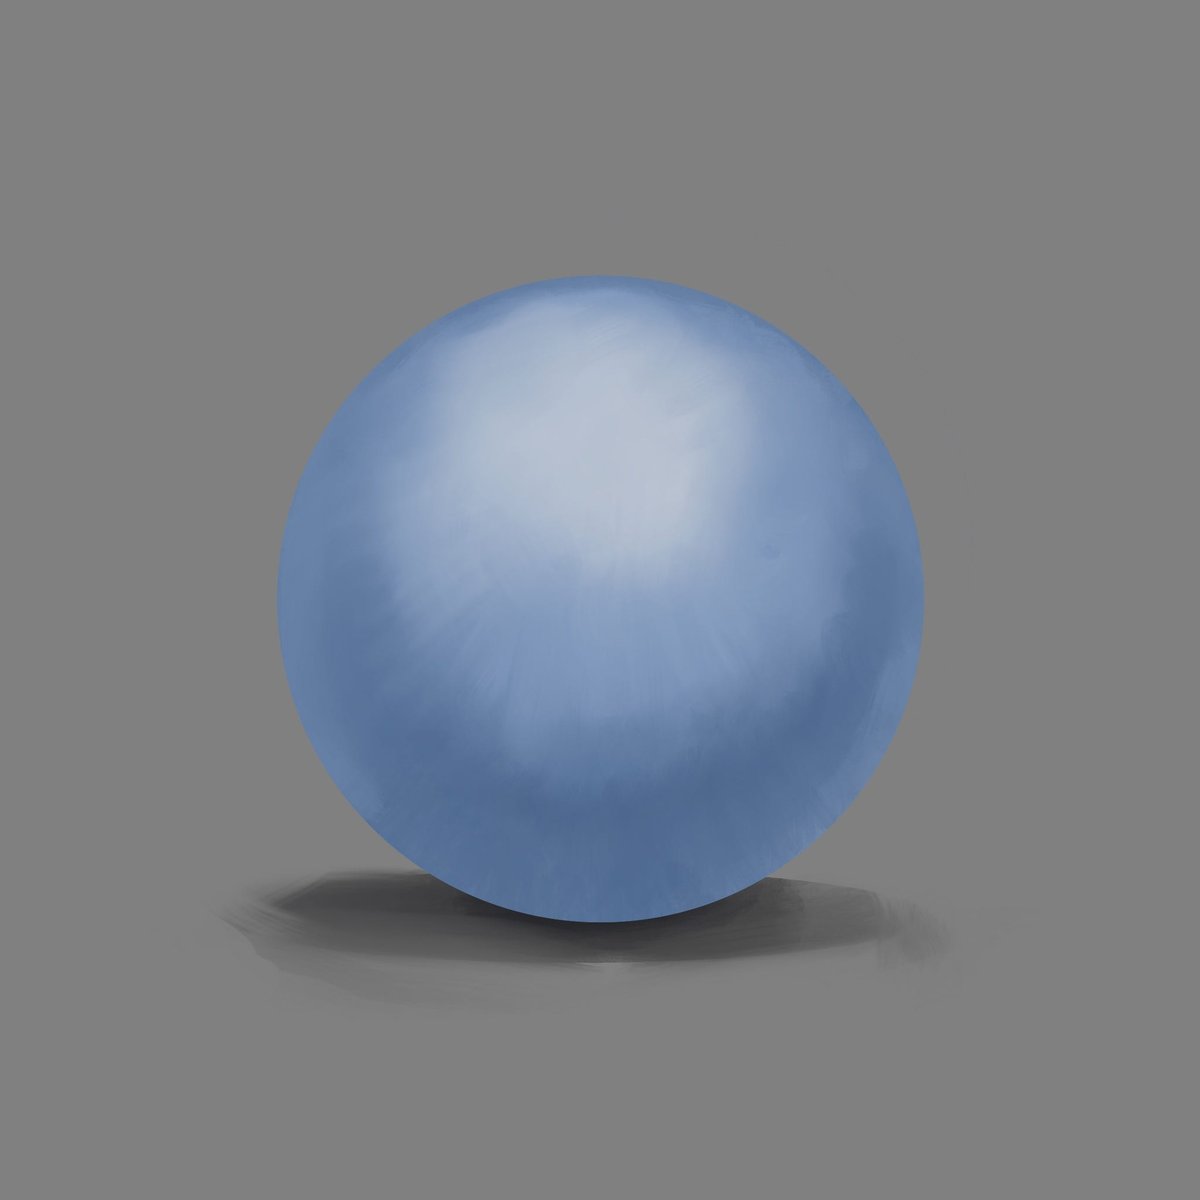 Quick sketch of a blue sphere, lit from the top and casting a small shadow